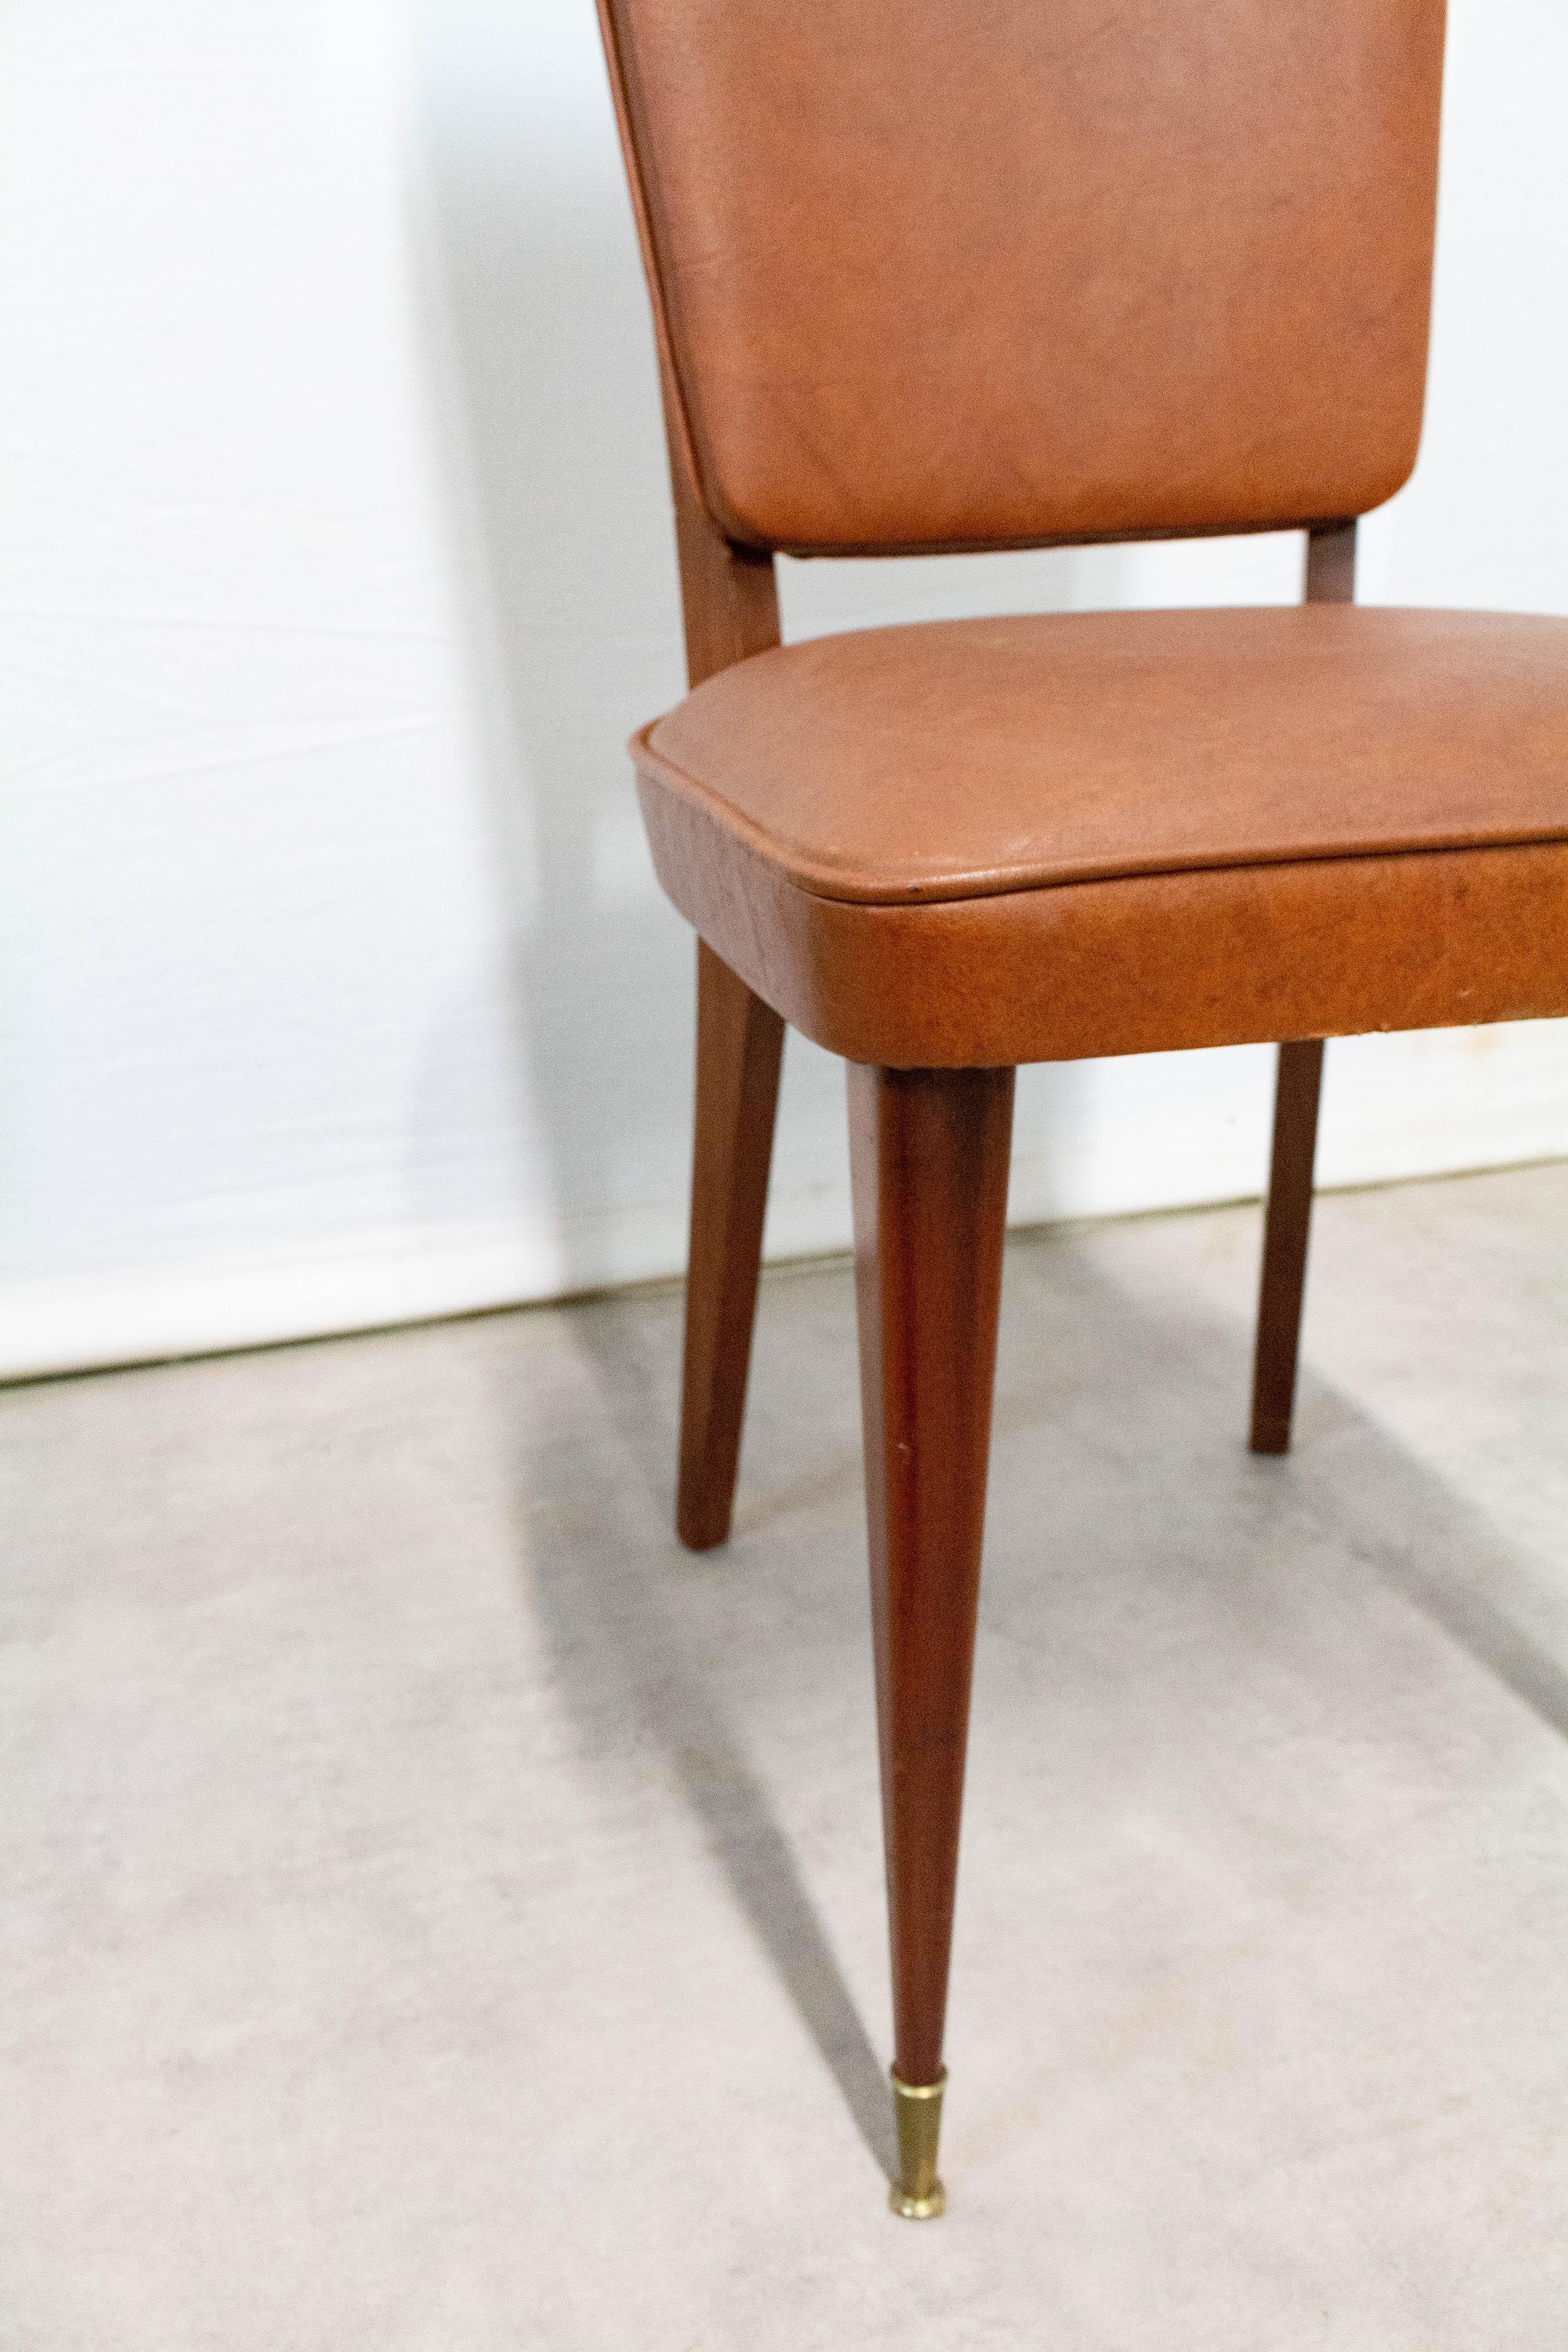 Six Midcentury Dining Chairs Brown Skai and Iroko Wood French, circa 1960 For Sale 3